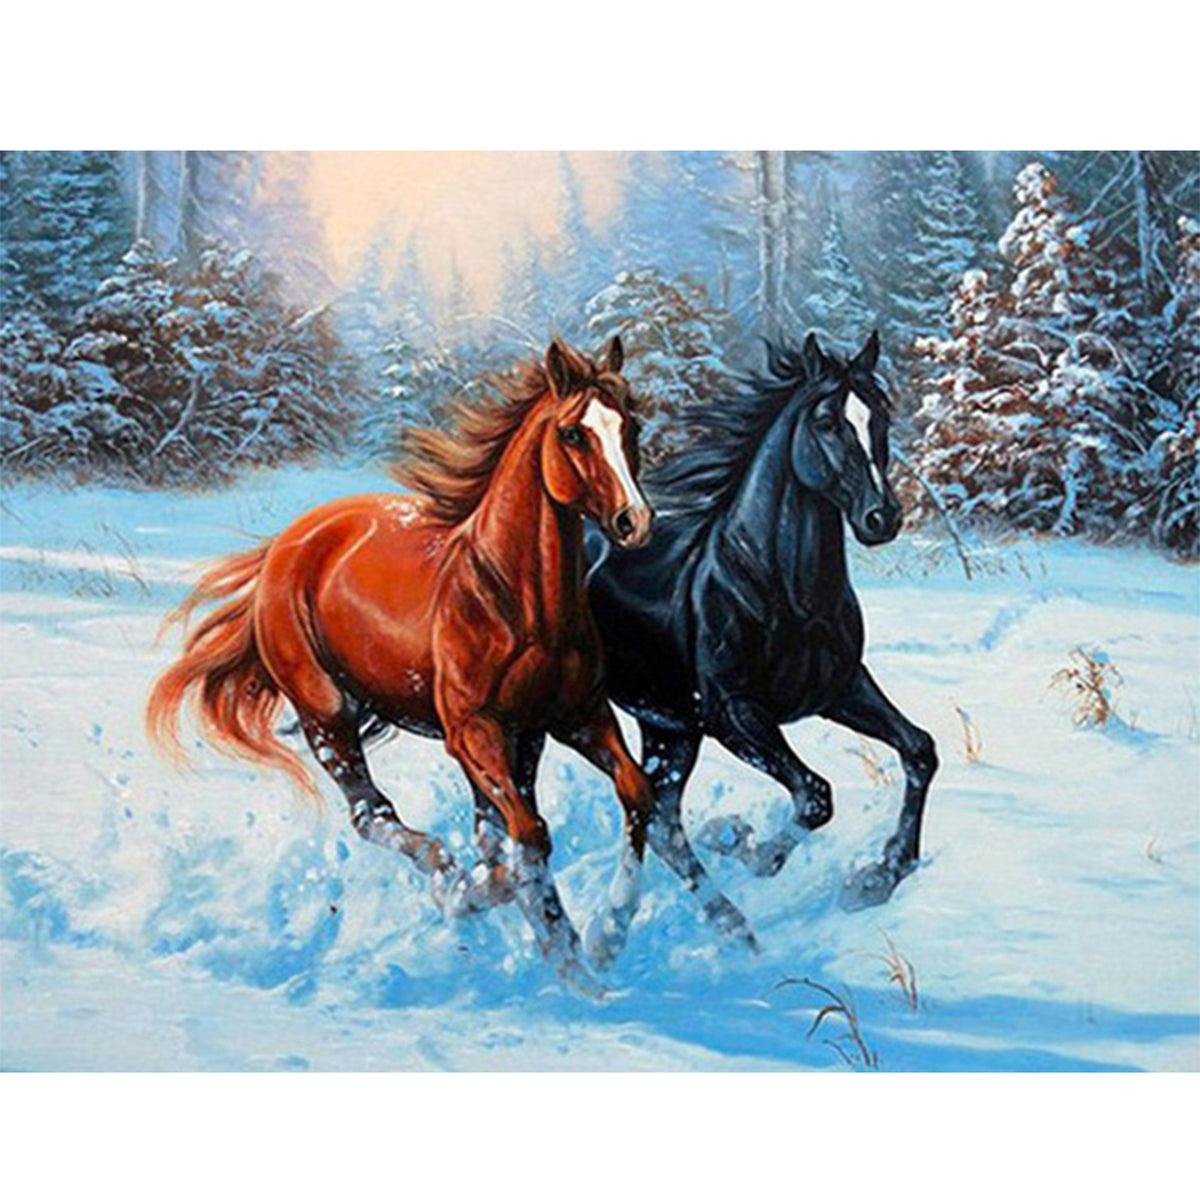 DIY 5D Diamond Painting Horse by Number Kits Winter Snow Paint with Diamond  Art